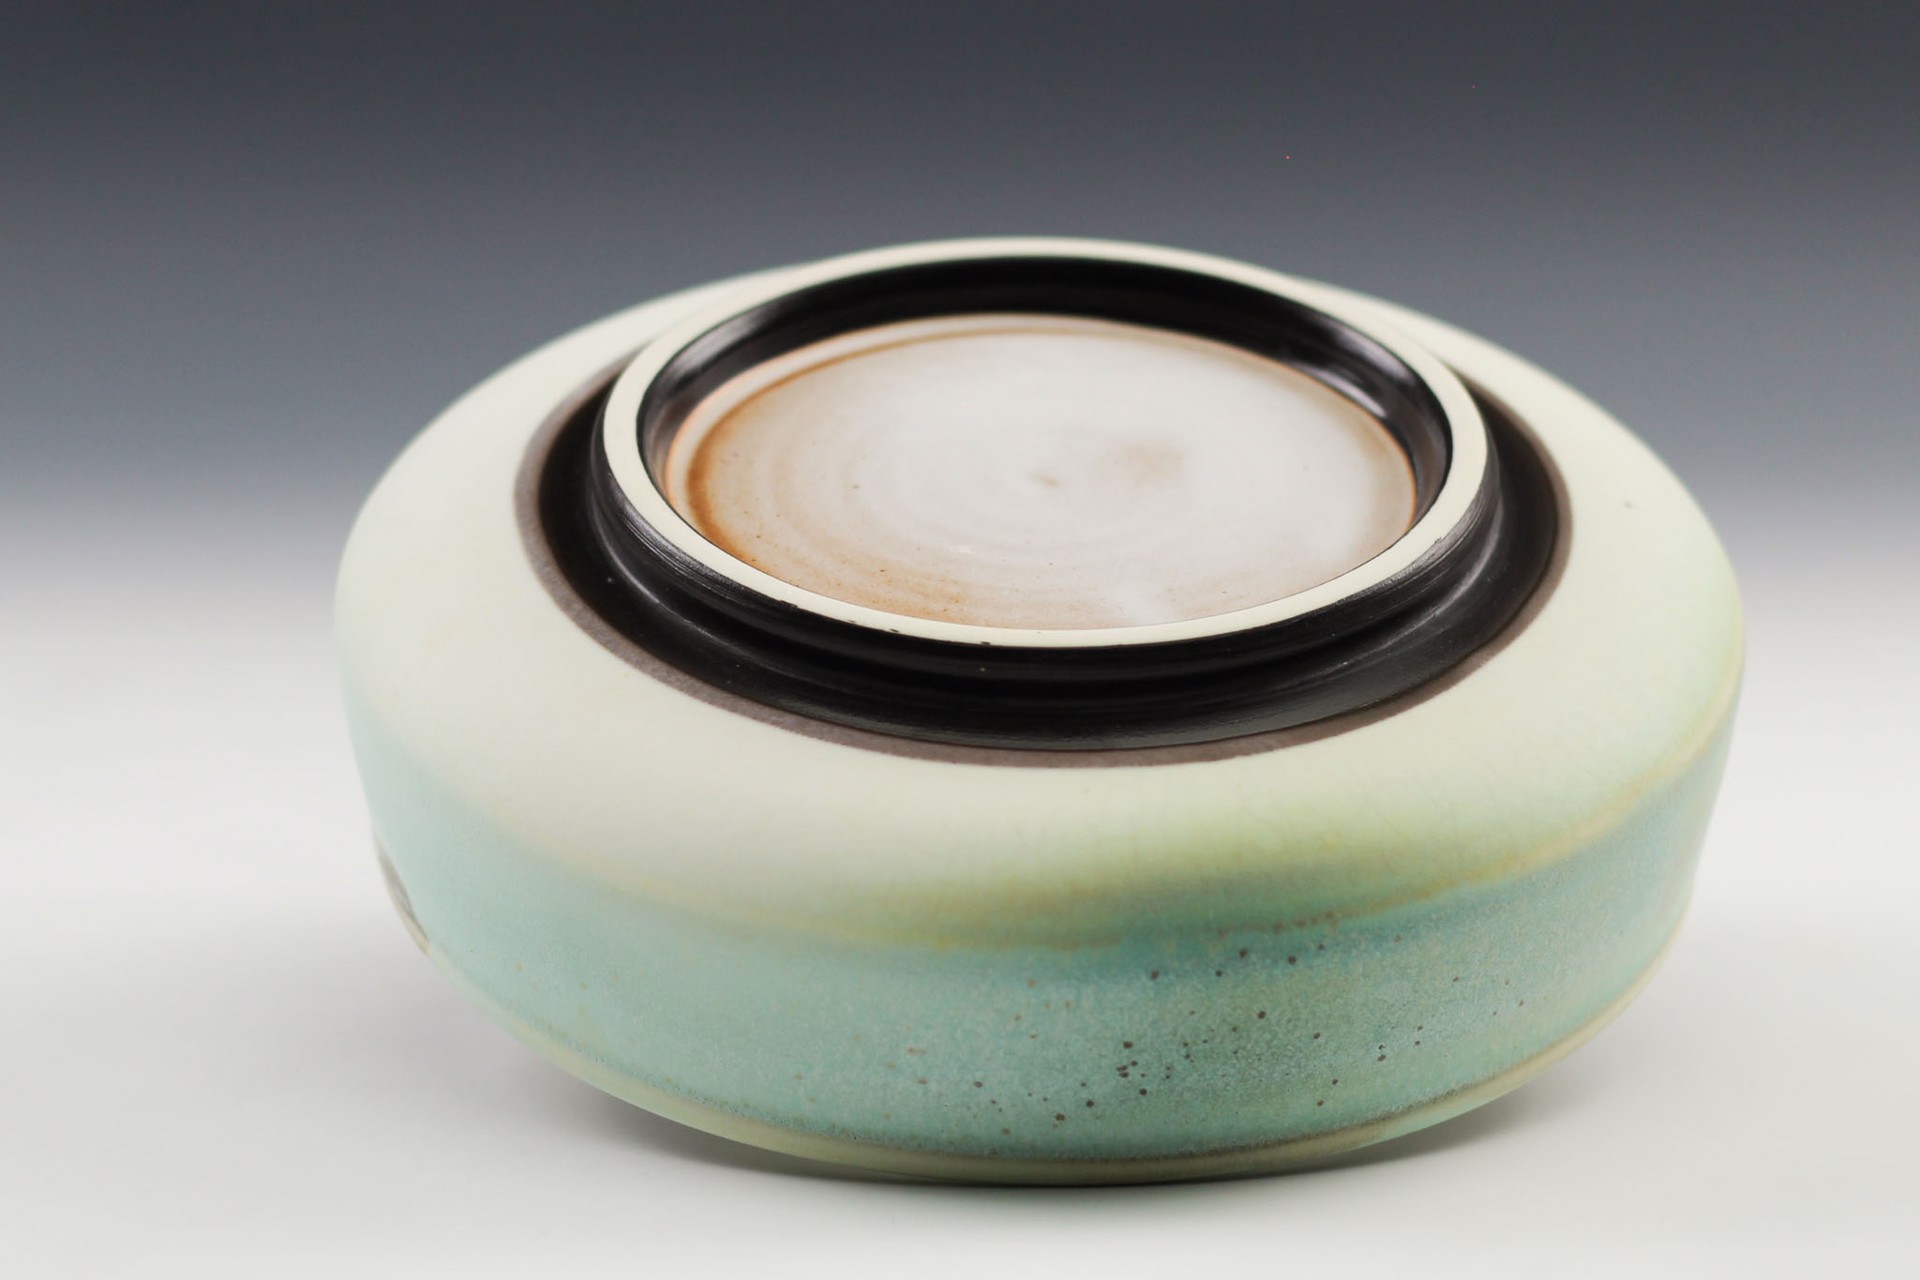 Turquoise Shallow Bowl by Charlie Olson